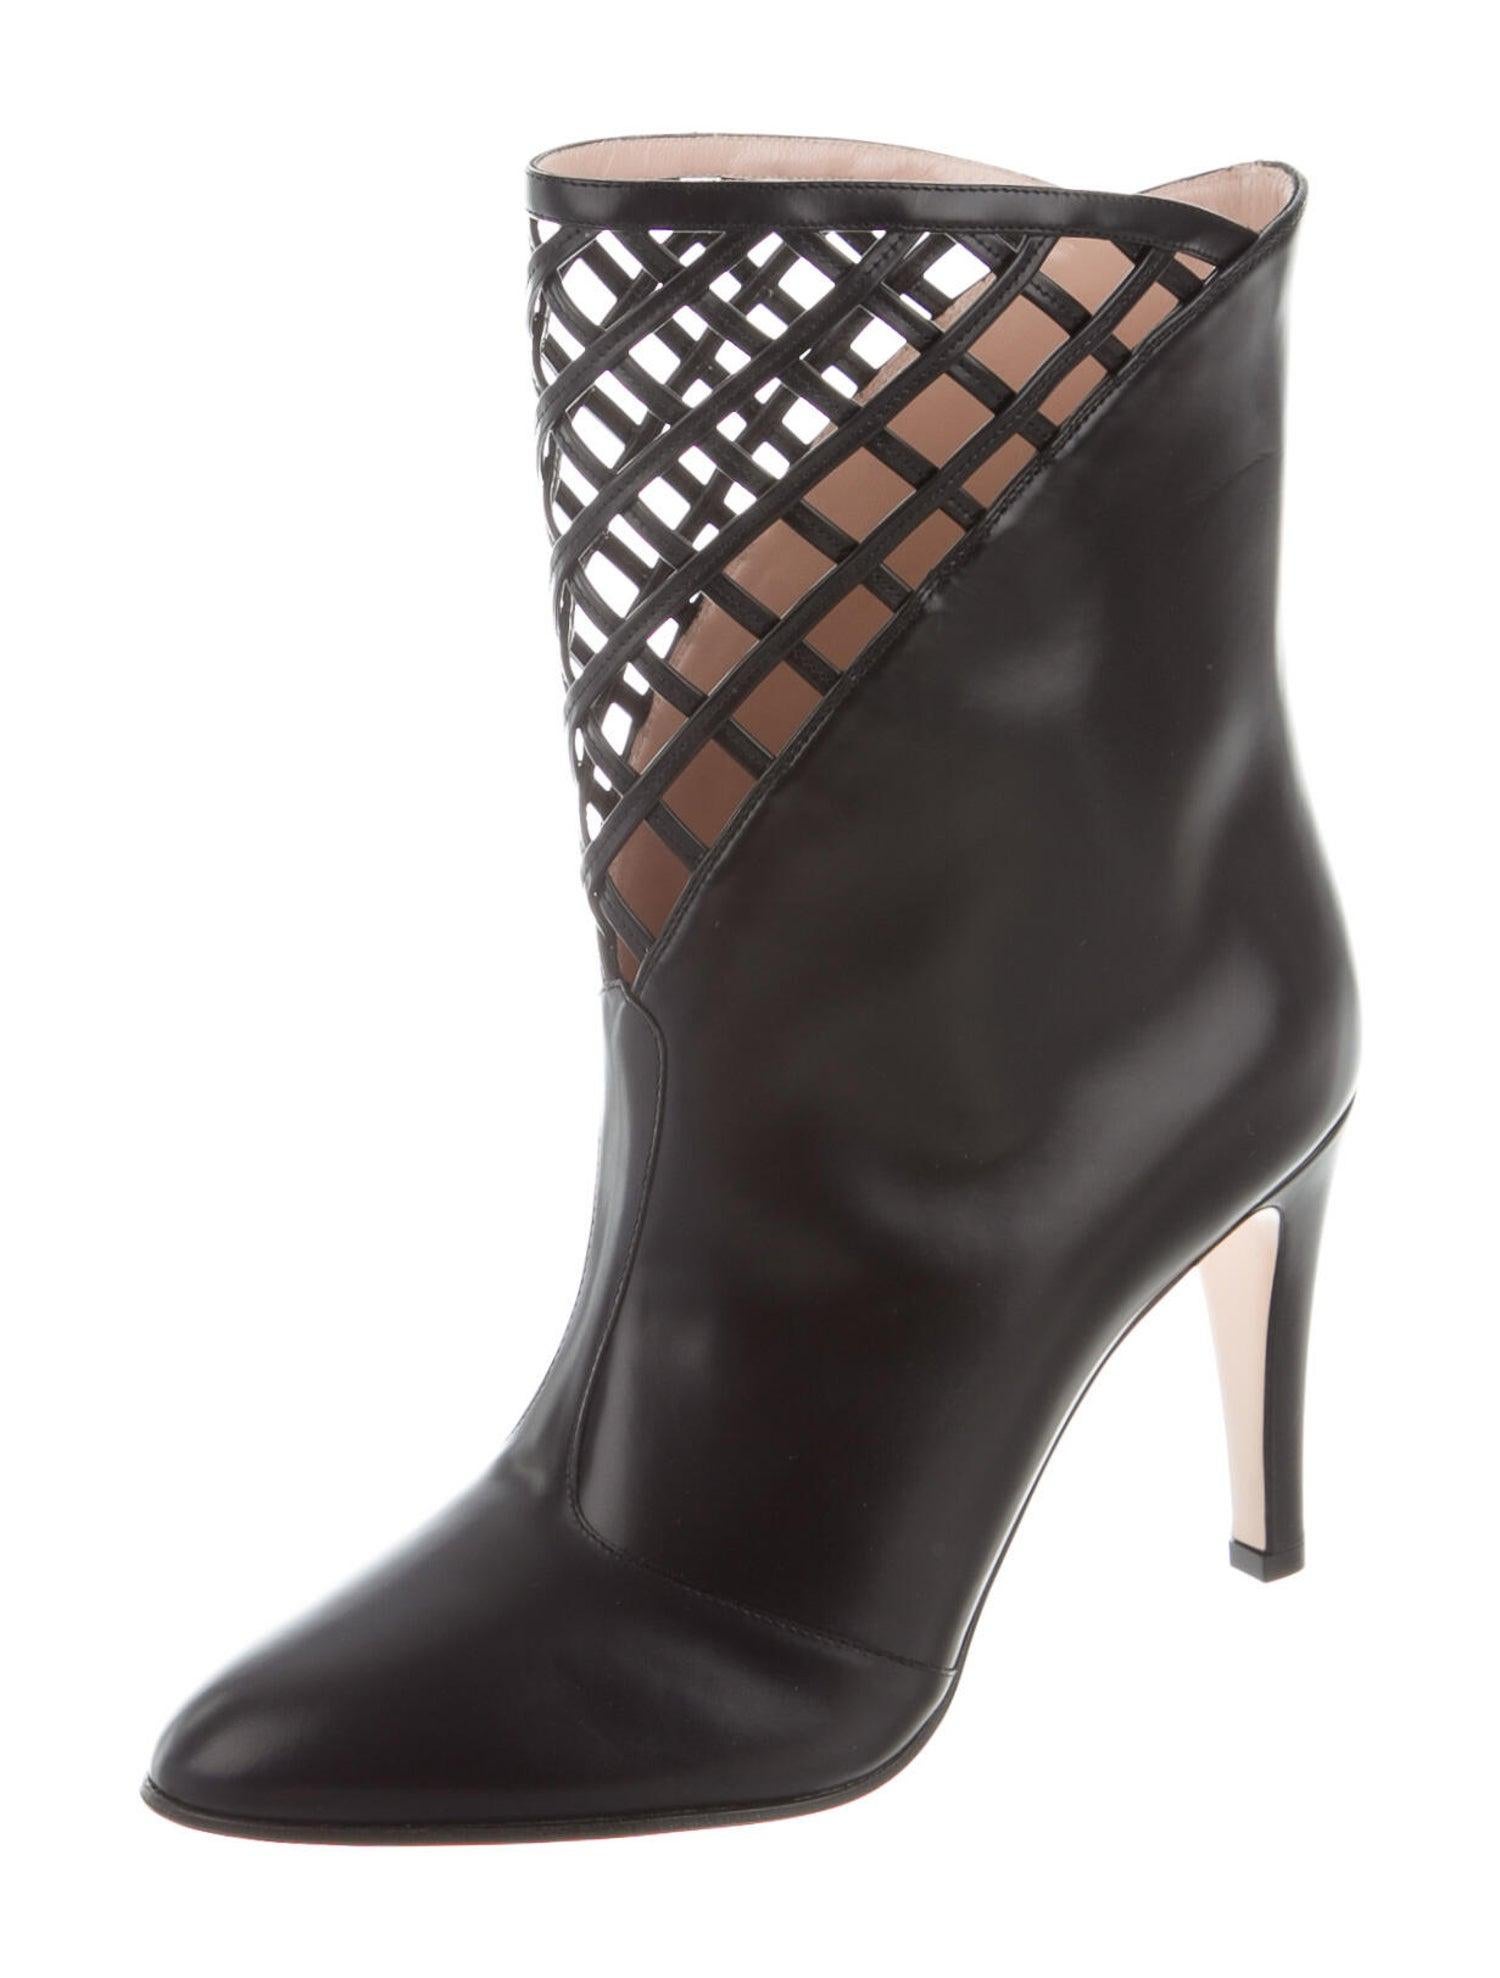 New Gucci Black Lattice Boots Booties With Box Sz 36.5 $2680 5